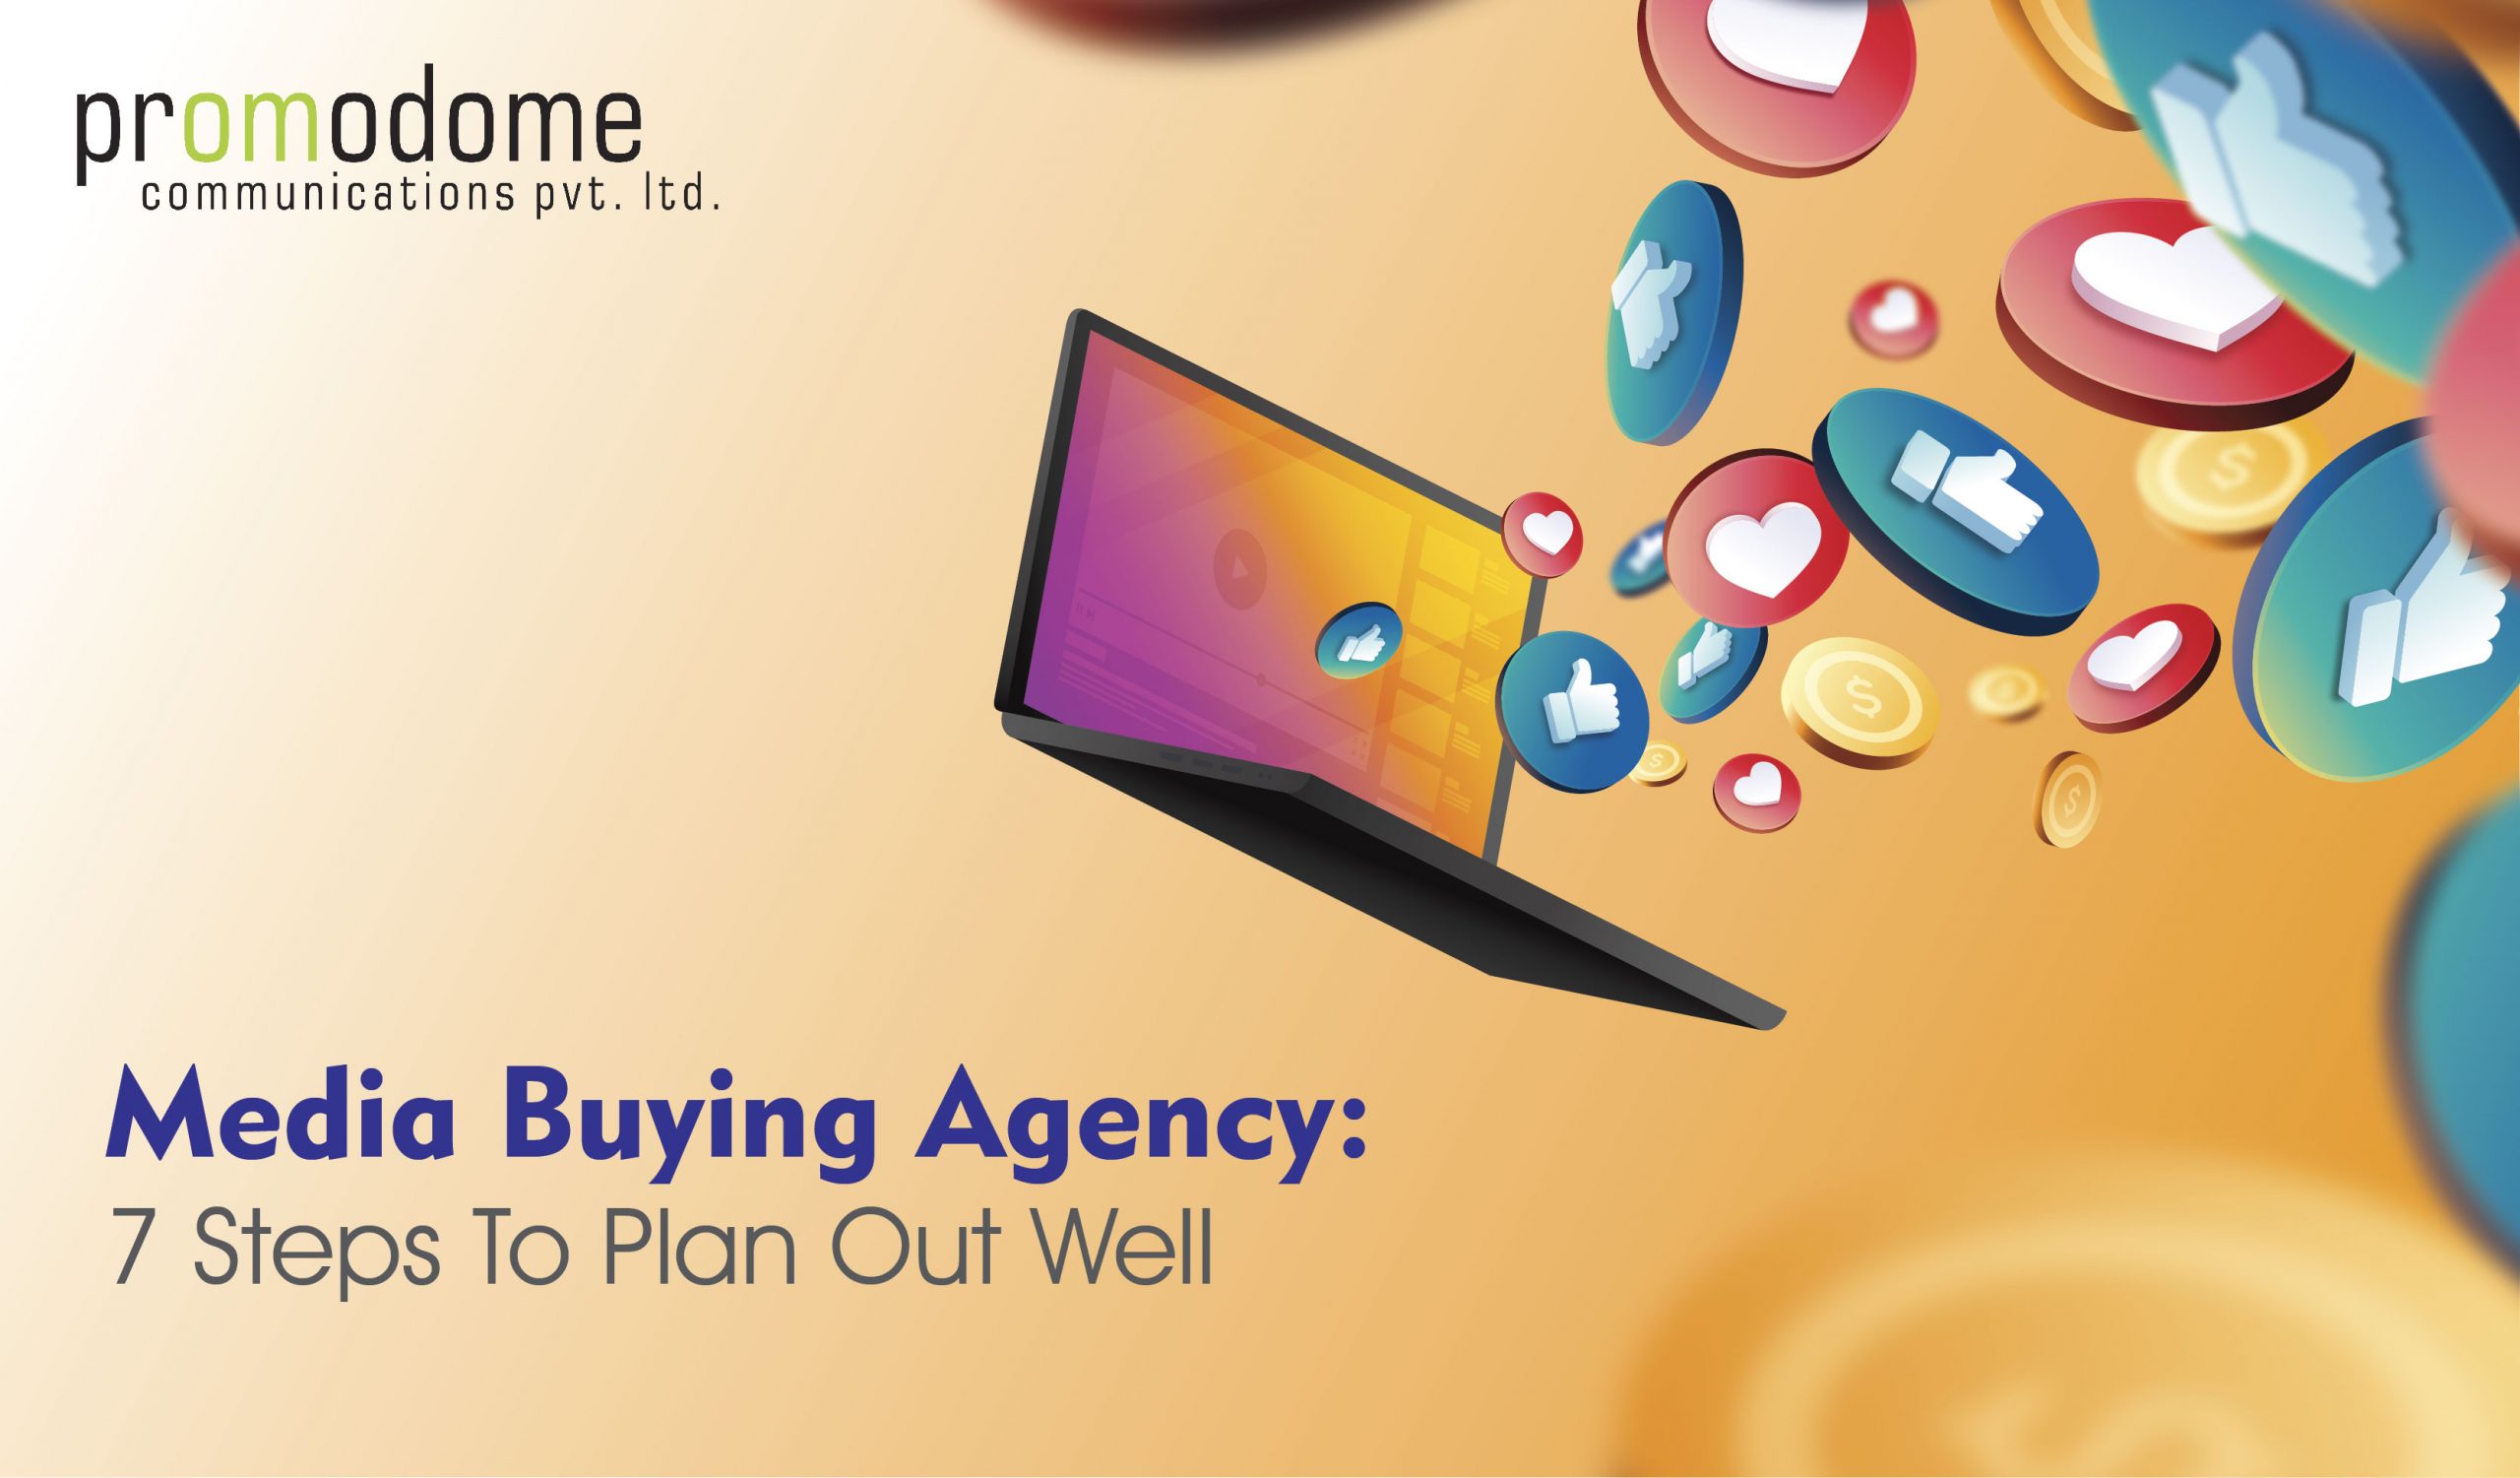 Media Buying Agency: 7 Steps To Plan Out Well